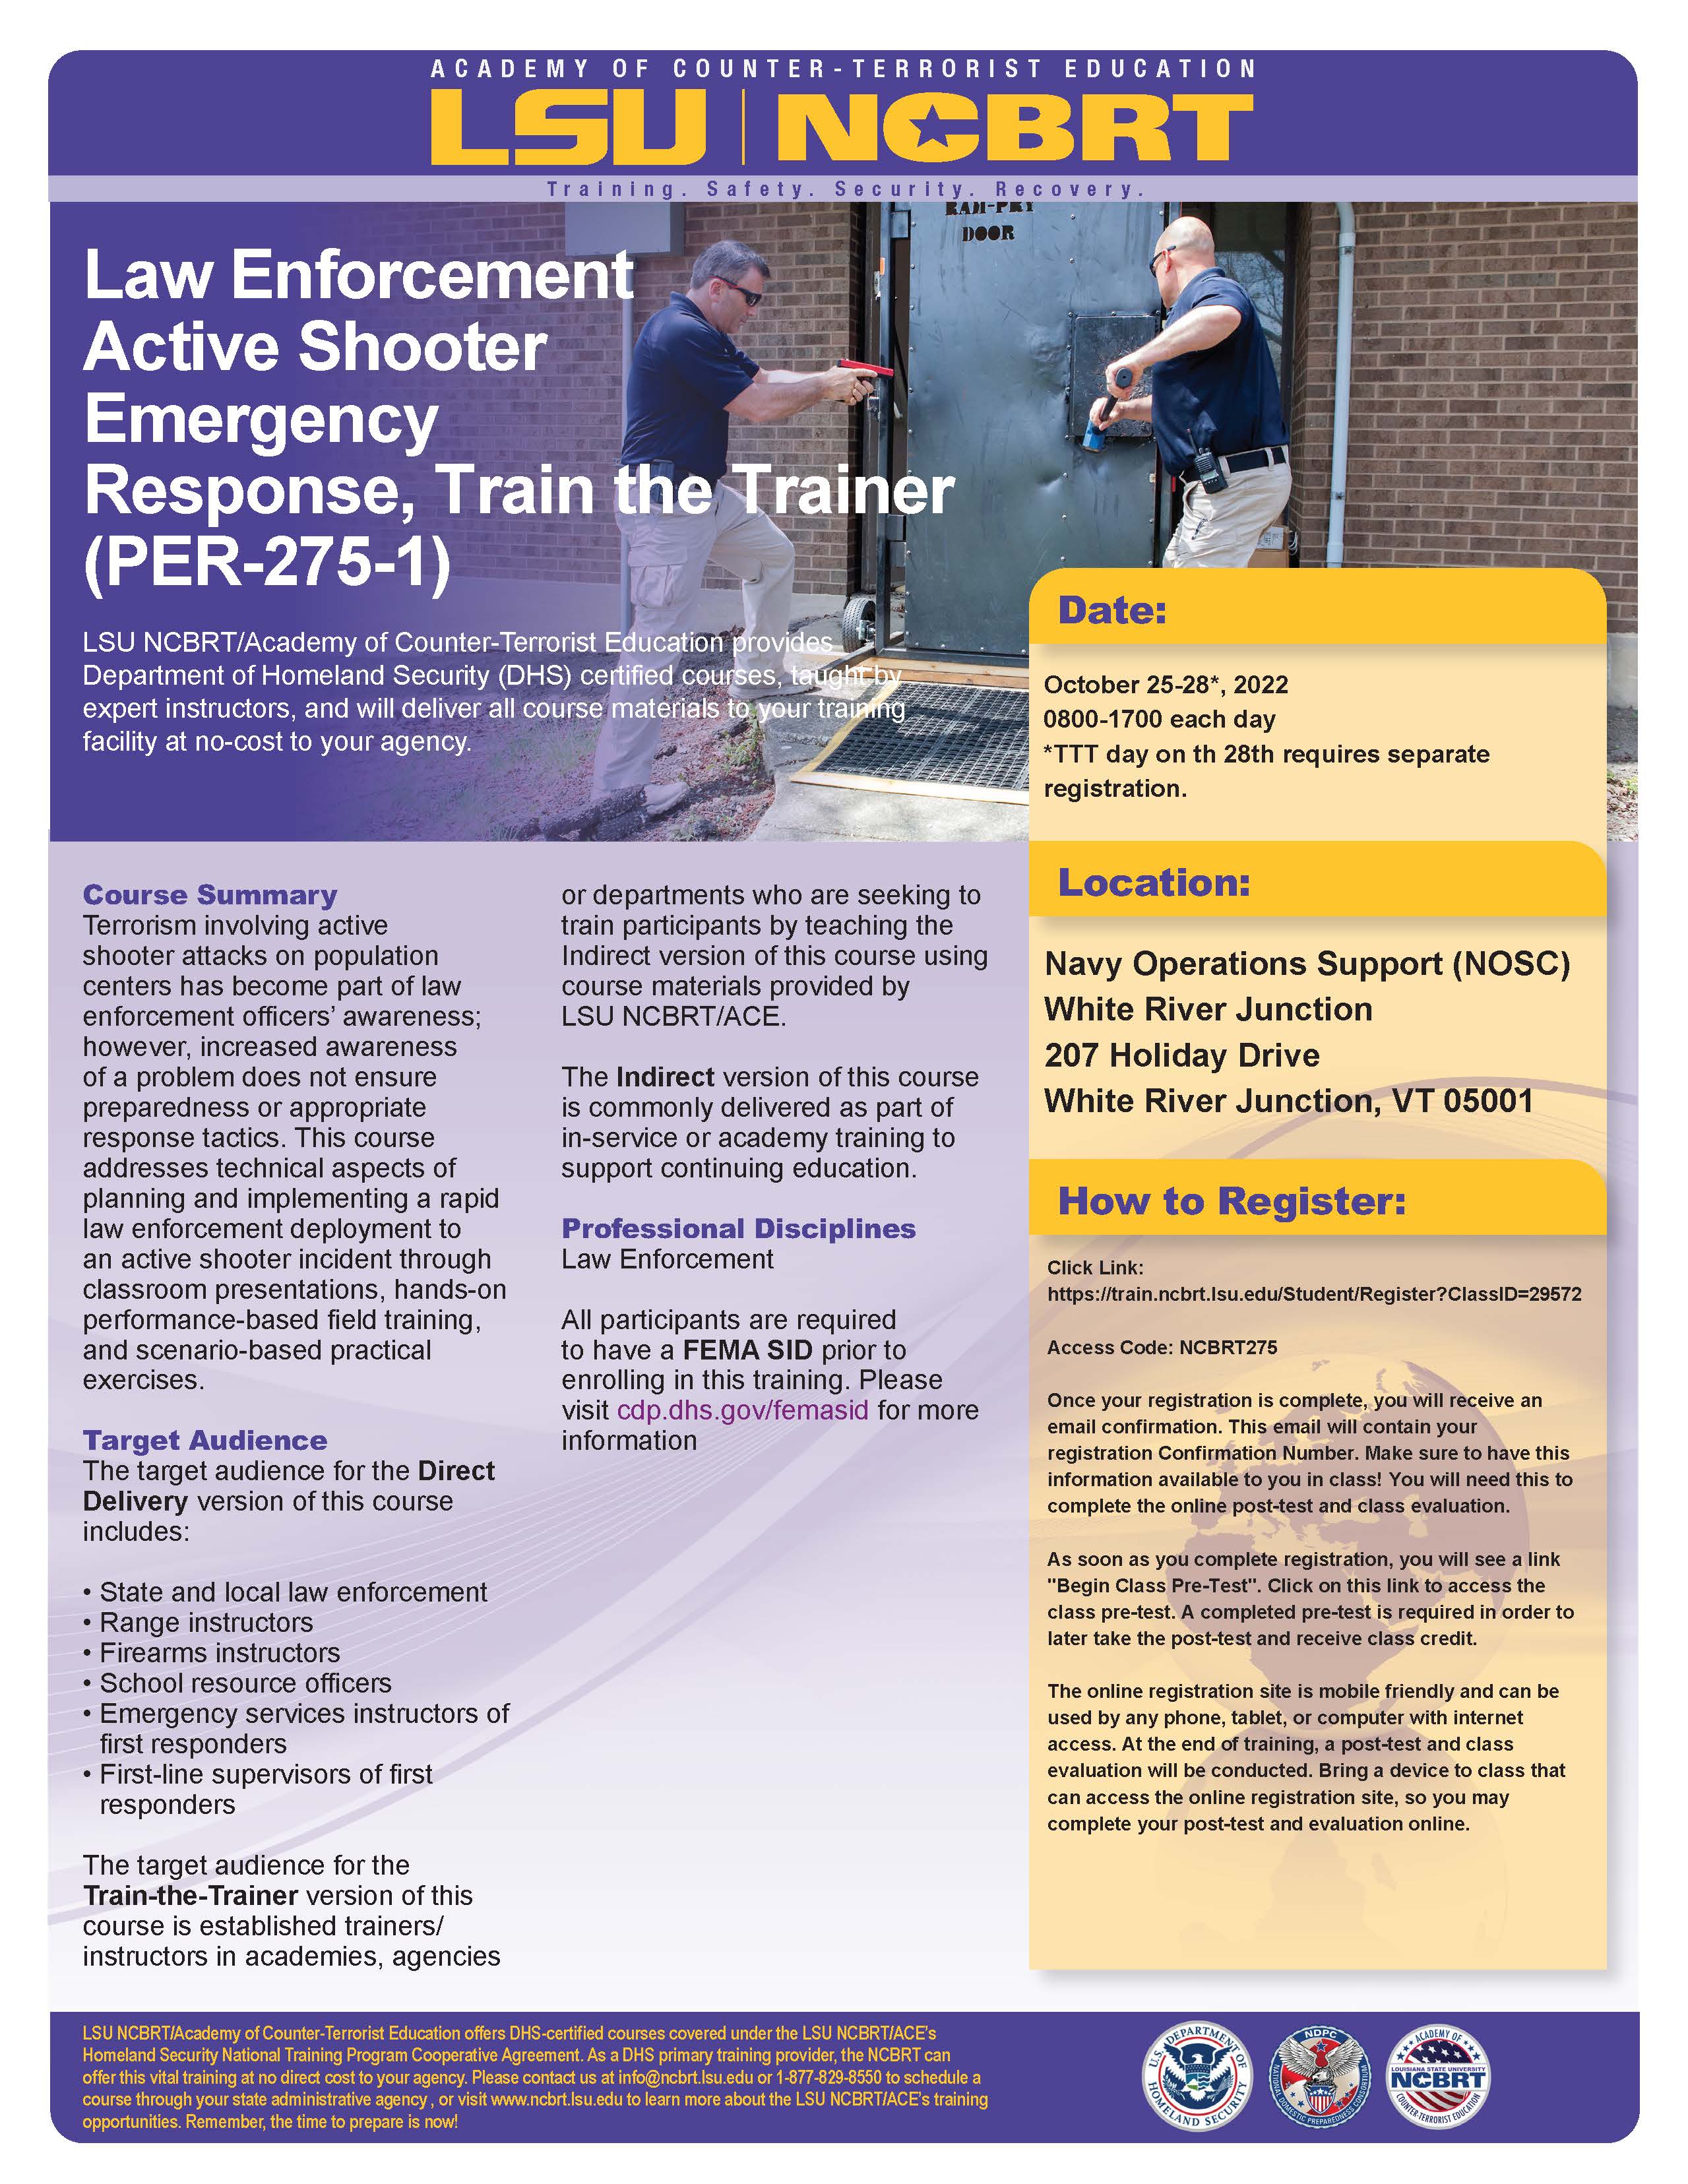 Law Enforcement Active Shooter Emergency Response (002)